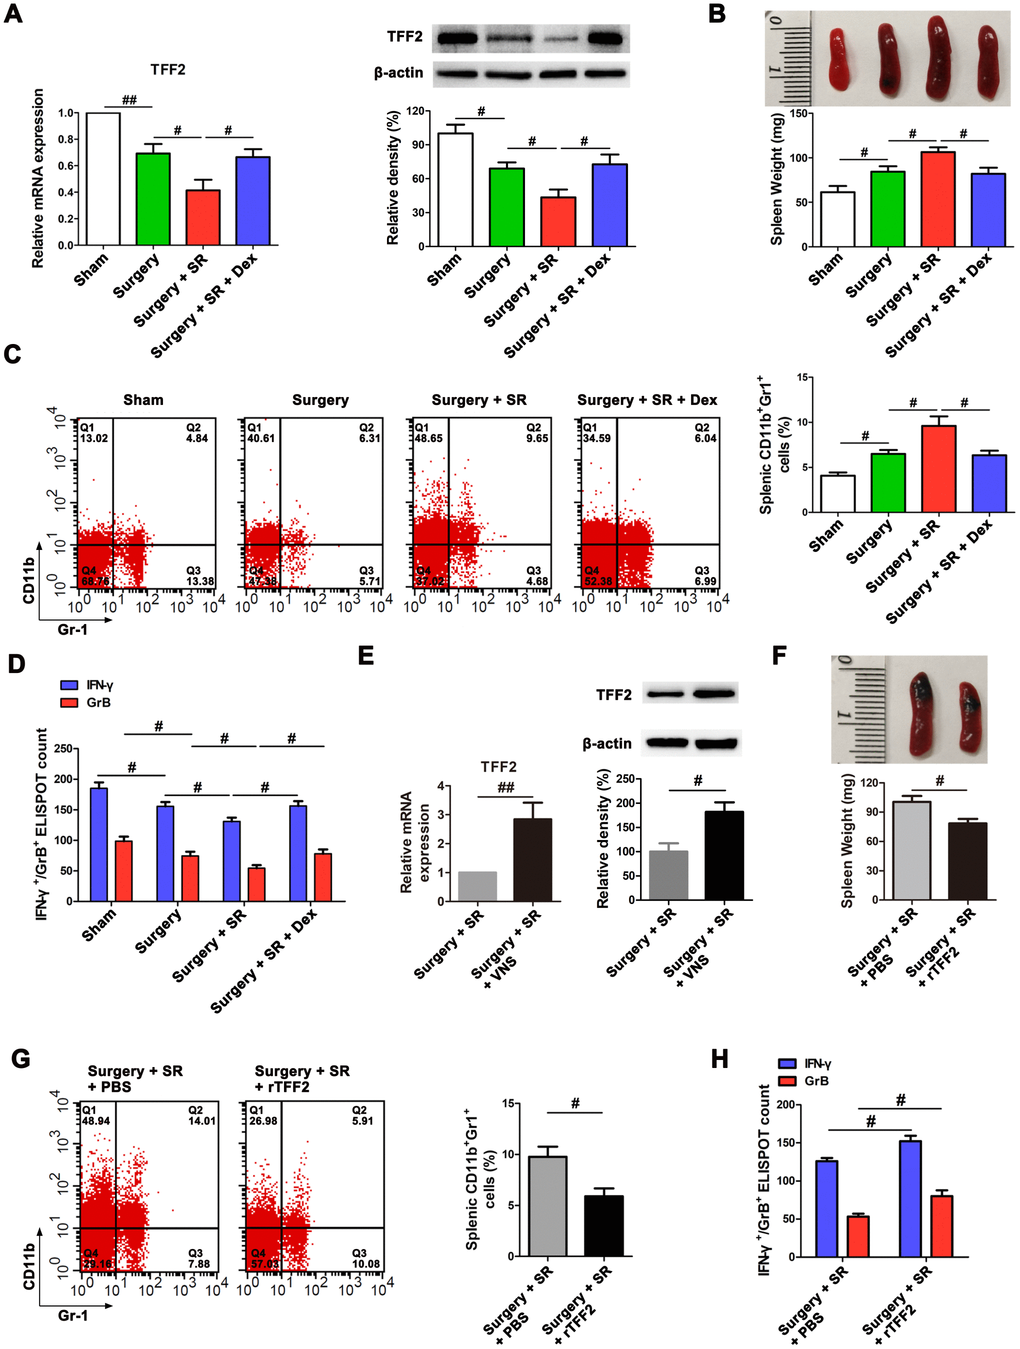 Postoperative sleep-restriction (SR) increased myeloid-derived suppressor cells (MDSCs) expansion and decreased splenic CD8+ cells activity via inhibiting splenic trefoil factor 2 (TFF2). (A) The expression of TFF2 in the spleen of SR mice with or without dexmedetomidine (Dex) treatment was analysed by real-time PCR (RT-PCR and western blotting. (B) Spleen weight in each group after 7 days of SR. (C) Flow cytometry analysis of spleen for CD11b+ Gr-1+ MDSCs in SR mice with or without Dex treatment. (D) The enzyme-linked immunospot (ELISPOT) assay of the levels of interferon-γ (IFN-γ) and Granzyme B (GrB) in splenic CD8+ T cells from SR mice with or without Dex treatment. (E) The mRNA and protein expression of TFF2 in the spleen were analysed by RT-PCR and western blotting in SR mice with or without vagus nerve stimulation (VNS). (F) Spleen weight in SR mice with the treatment of recombinant human TFF2 protein (rTFF2) or PBS. (G) Flow cytometry analysis of spleen for CD11b+ Gr-1+ MDSCs in SR mice with the treatment of rTFF2 or PBS. (H) ELISPOT assay of the levels of IFN-γ and GrB in splenic CD8+ T cells from SR mice with the treatment of rTFF2 or PBS. All data represent mean ± SEM, n = 5; #P ##P 